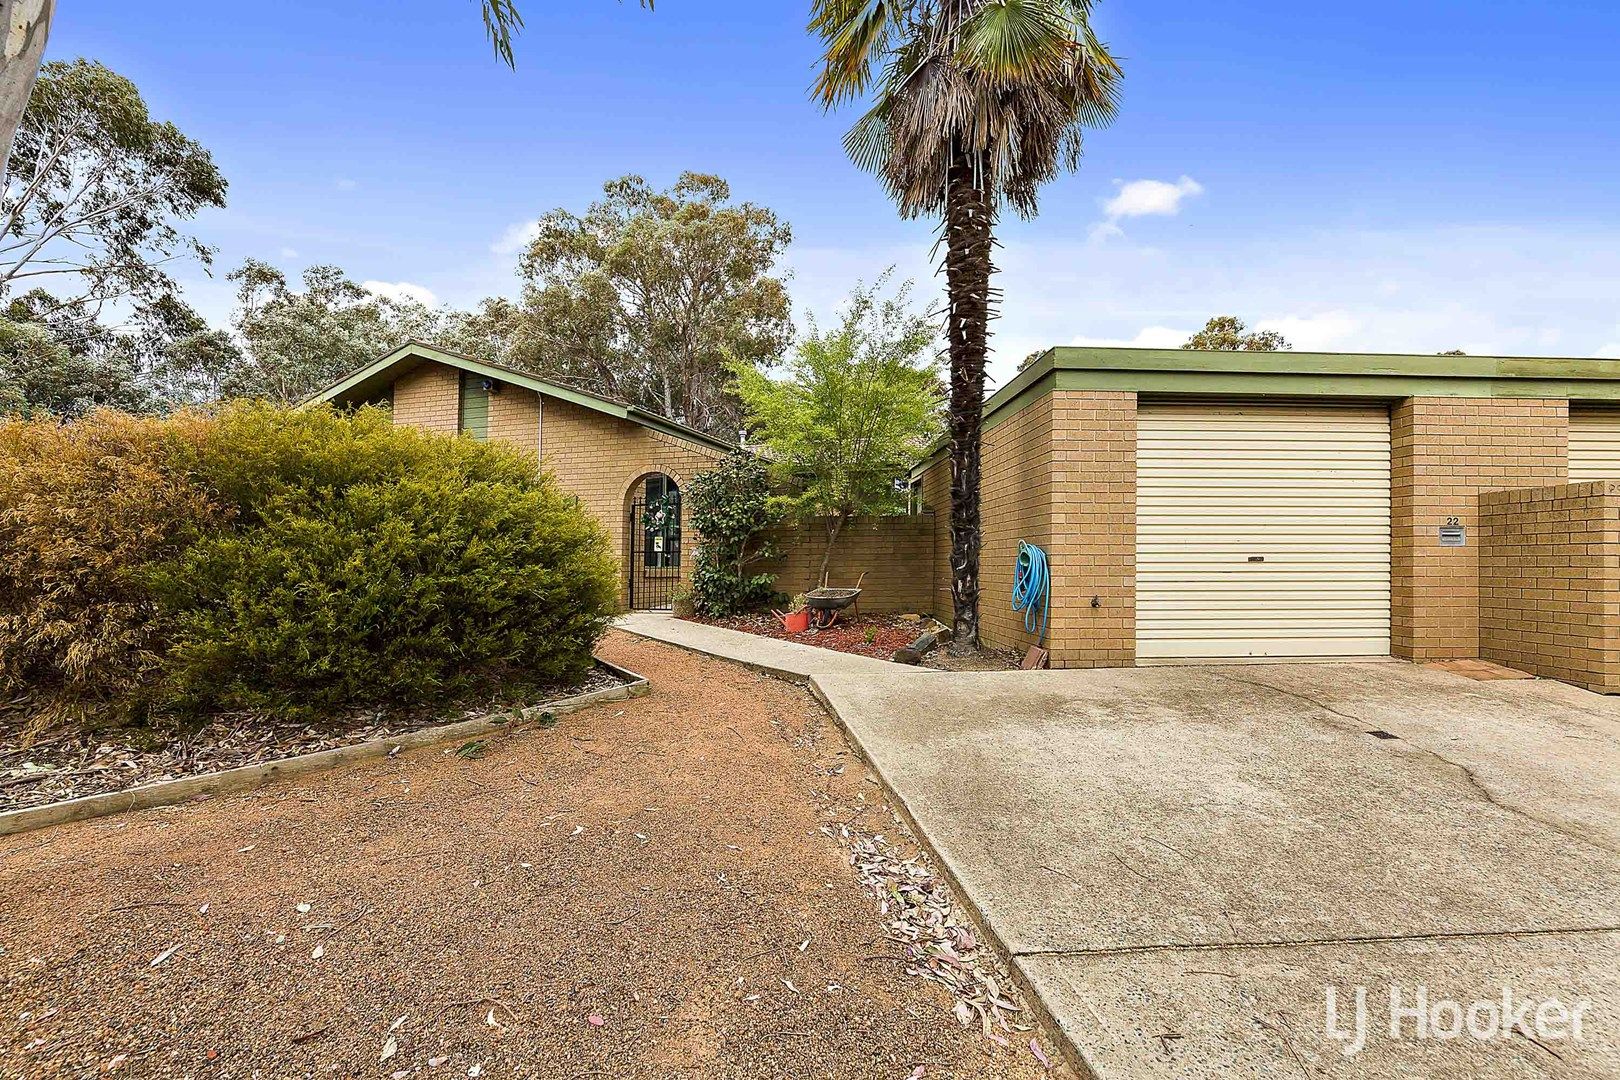 22/93 Chewings Street, Scullin ACT 2614, Image 0